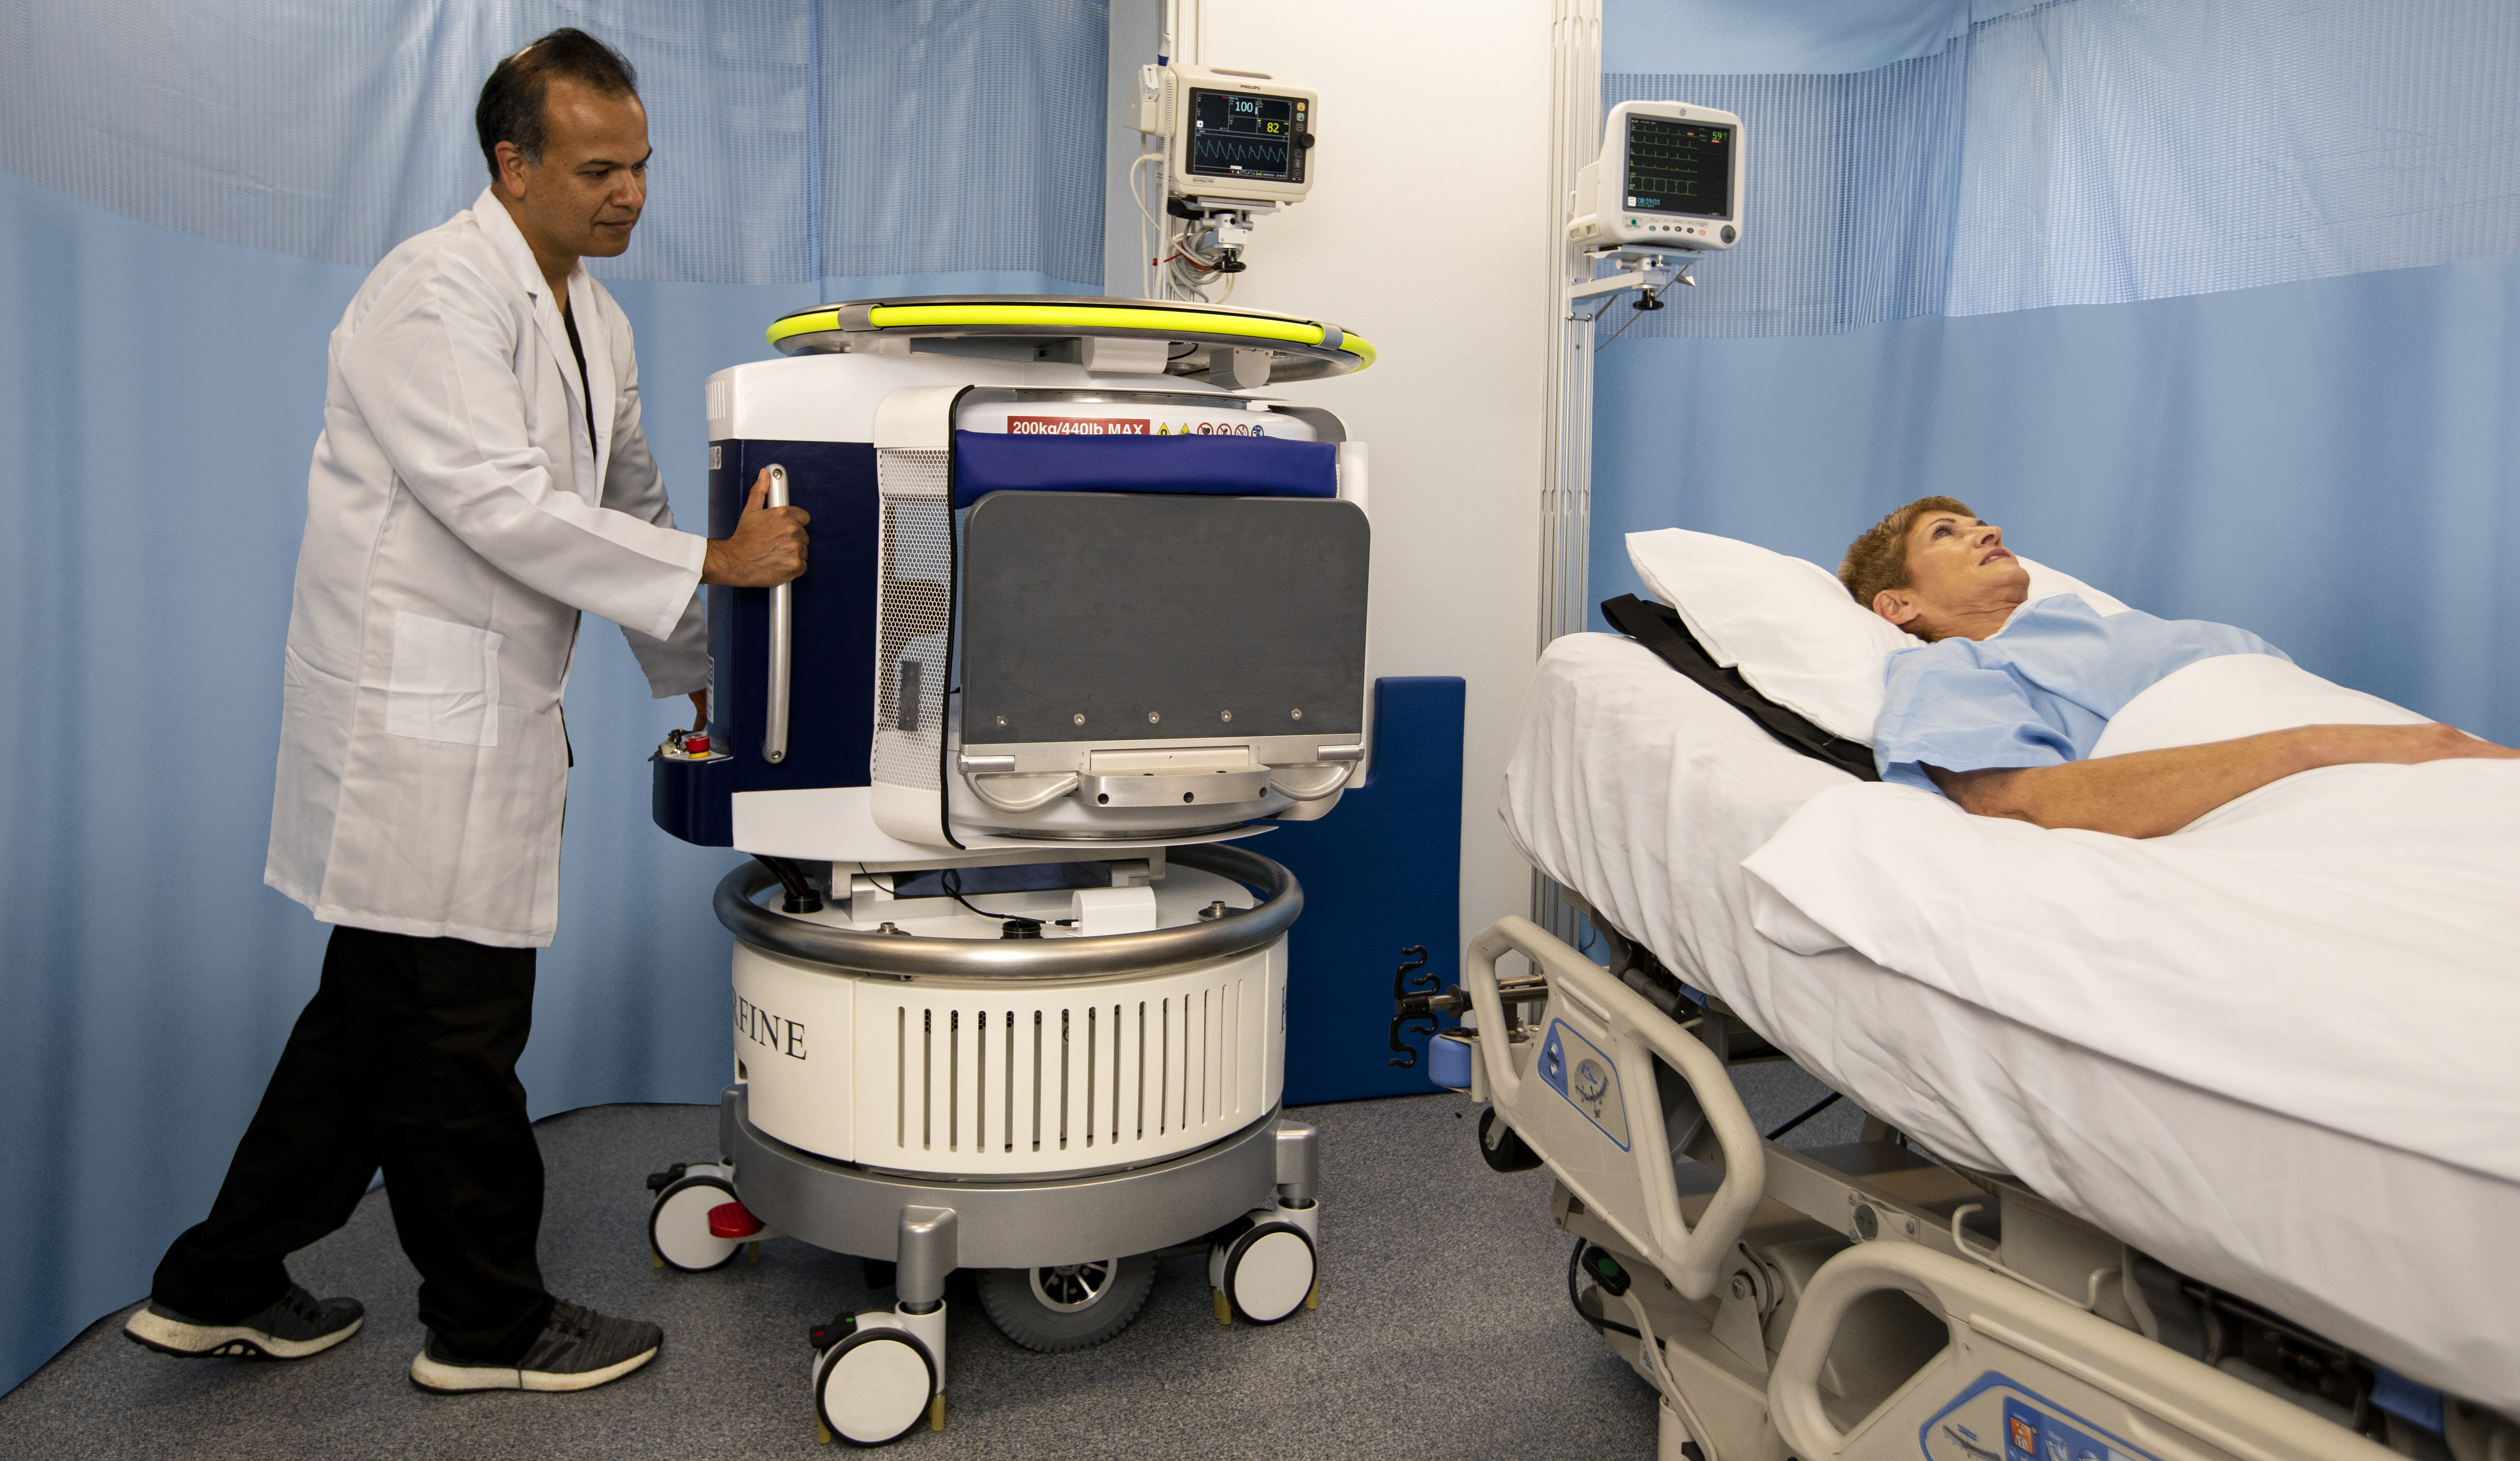 Hyperfine Introduces World’s First Point-of-Care MRI System at the American College of Emergency Physicians (ACEP) Scientific Assembly 2019